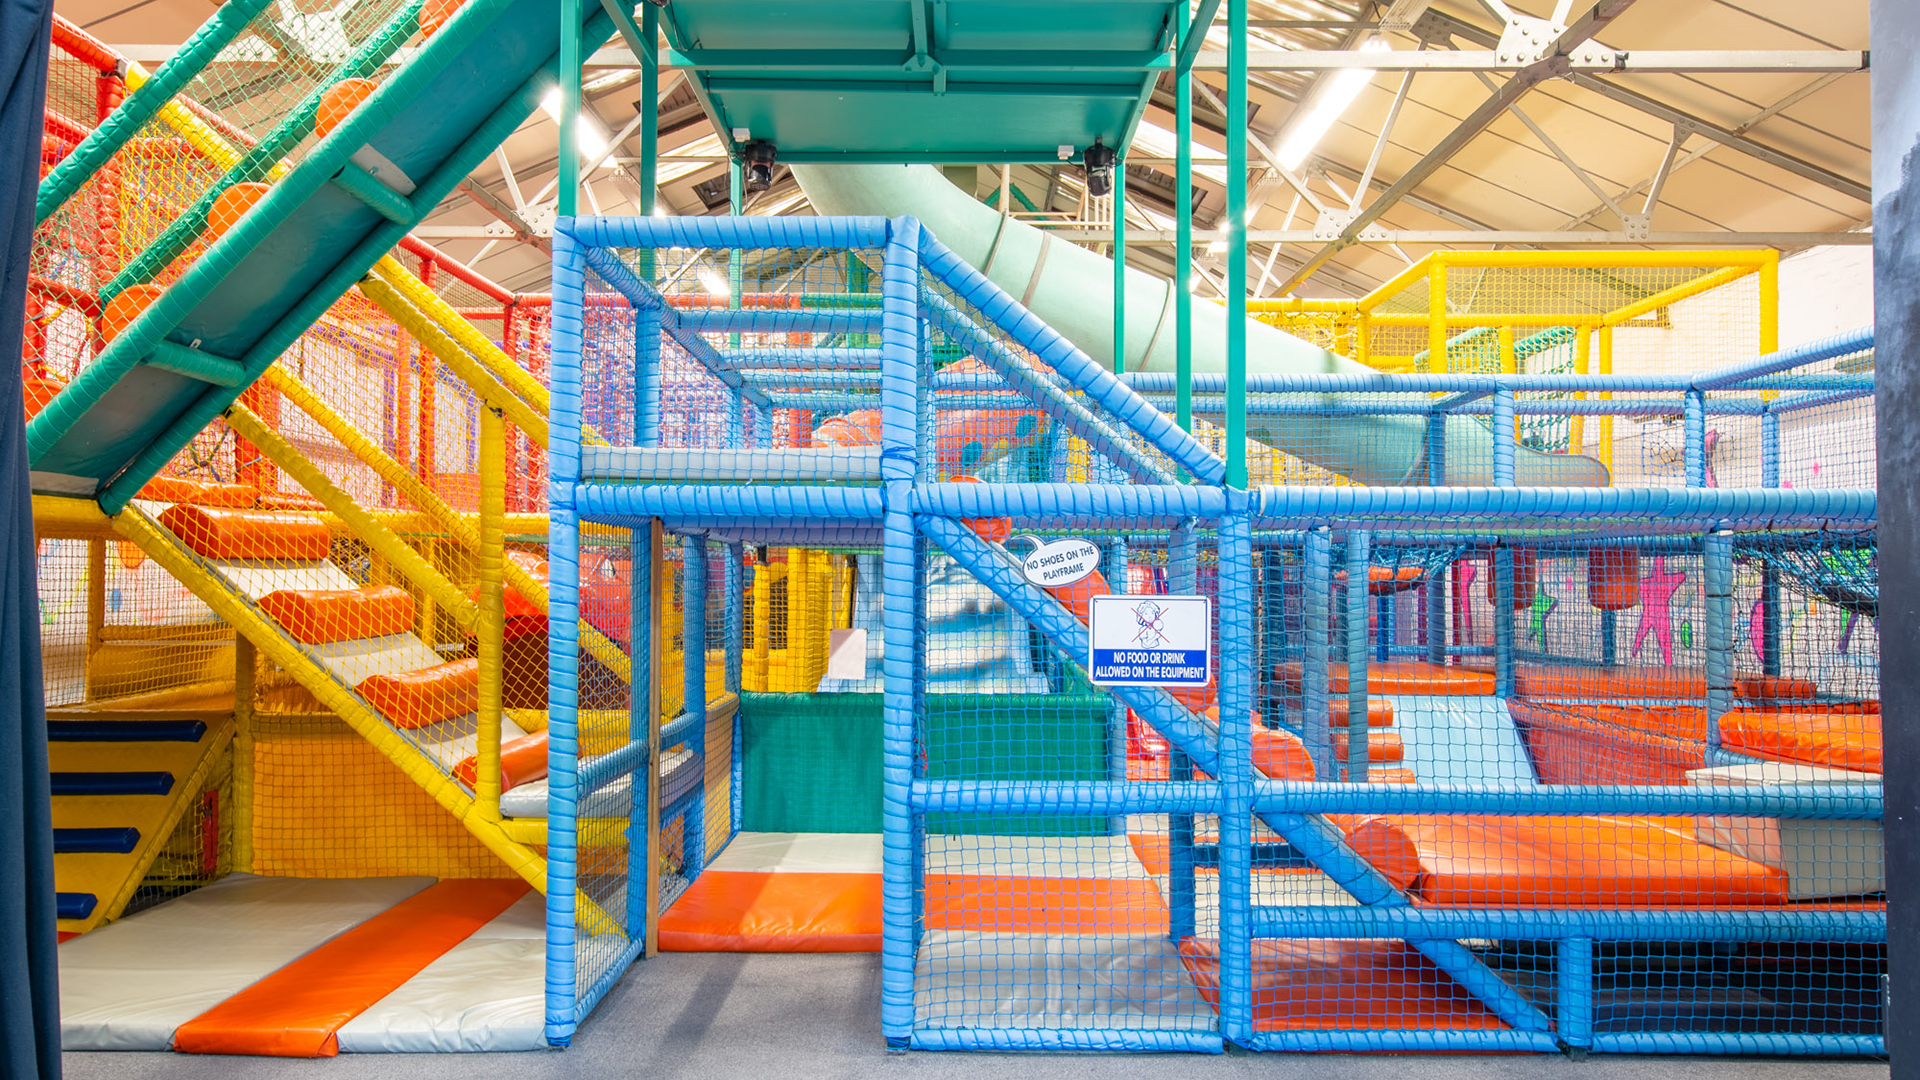 Wonderland: Adult Soft Play offers a jungle of slides, ball pits, swings and passages